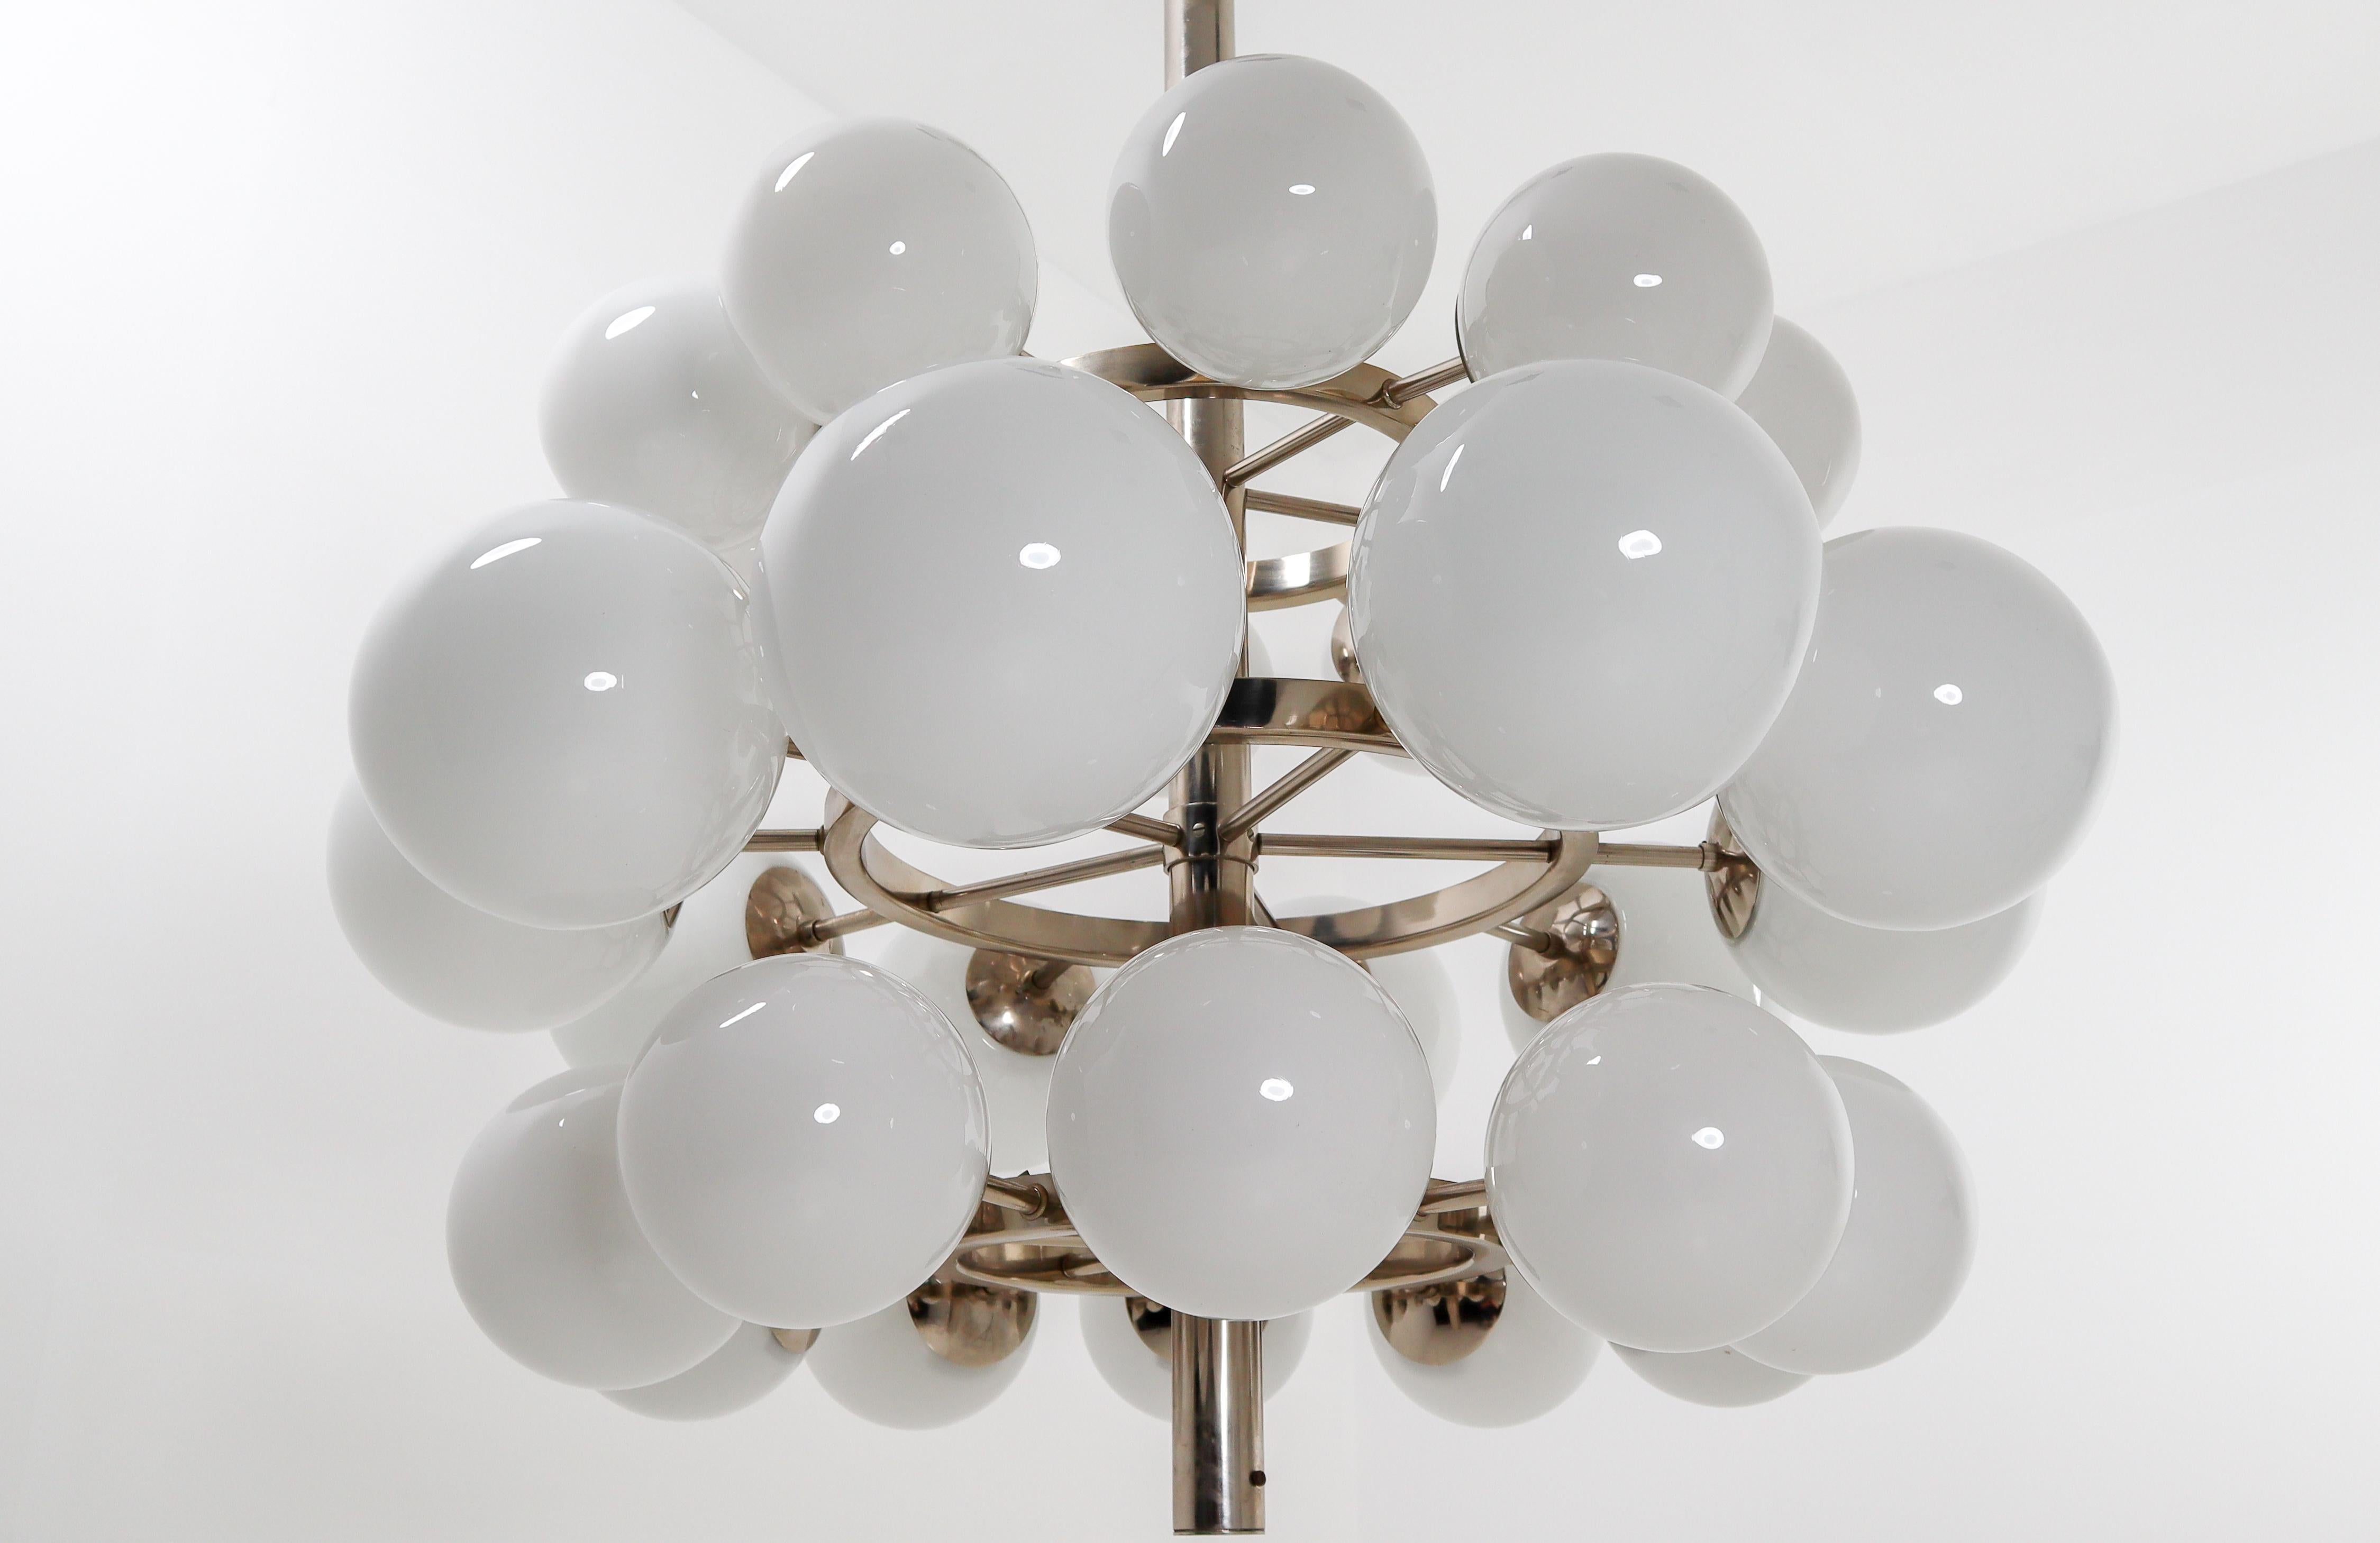 Mid-Century Modernist extreme large chandelier with 30 hand blown opaline glass globes. The fixture is made of metal with a chrome-brass patina. Therefore an interesting color is visible on the metal. Thirty opaline glass globes are placed over